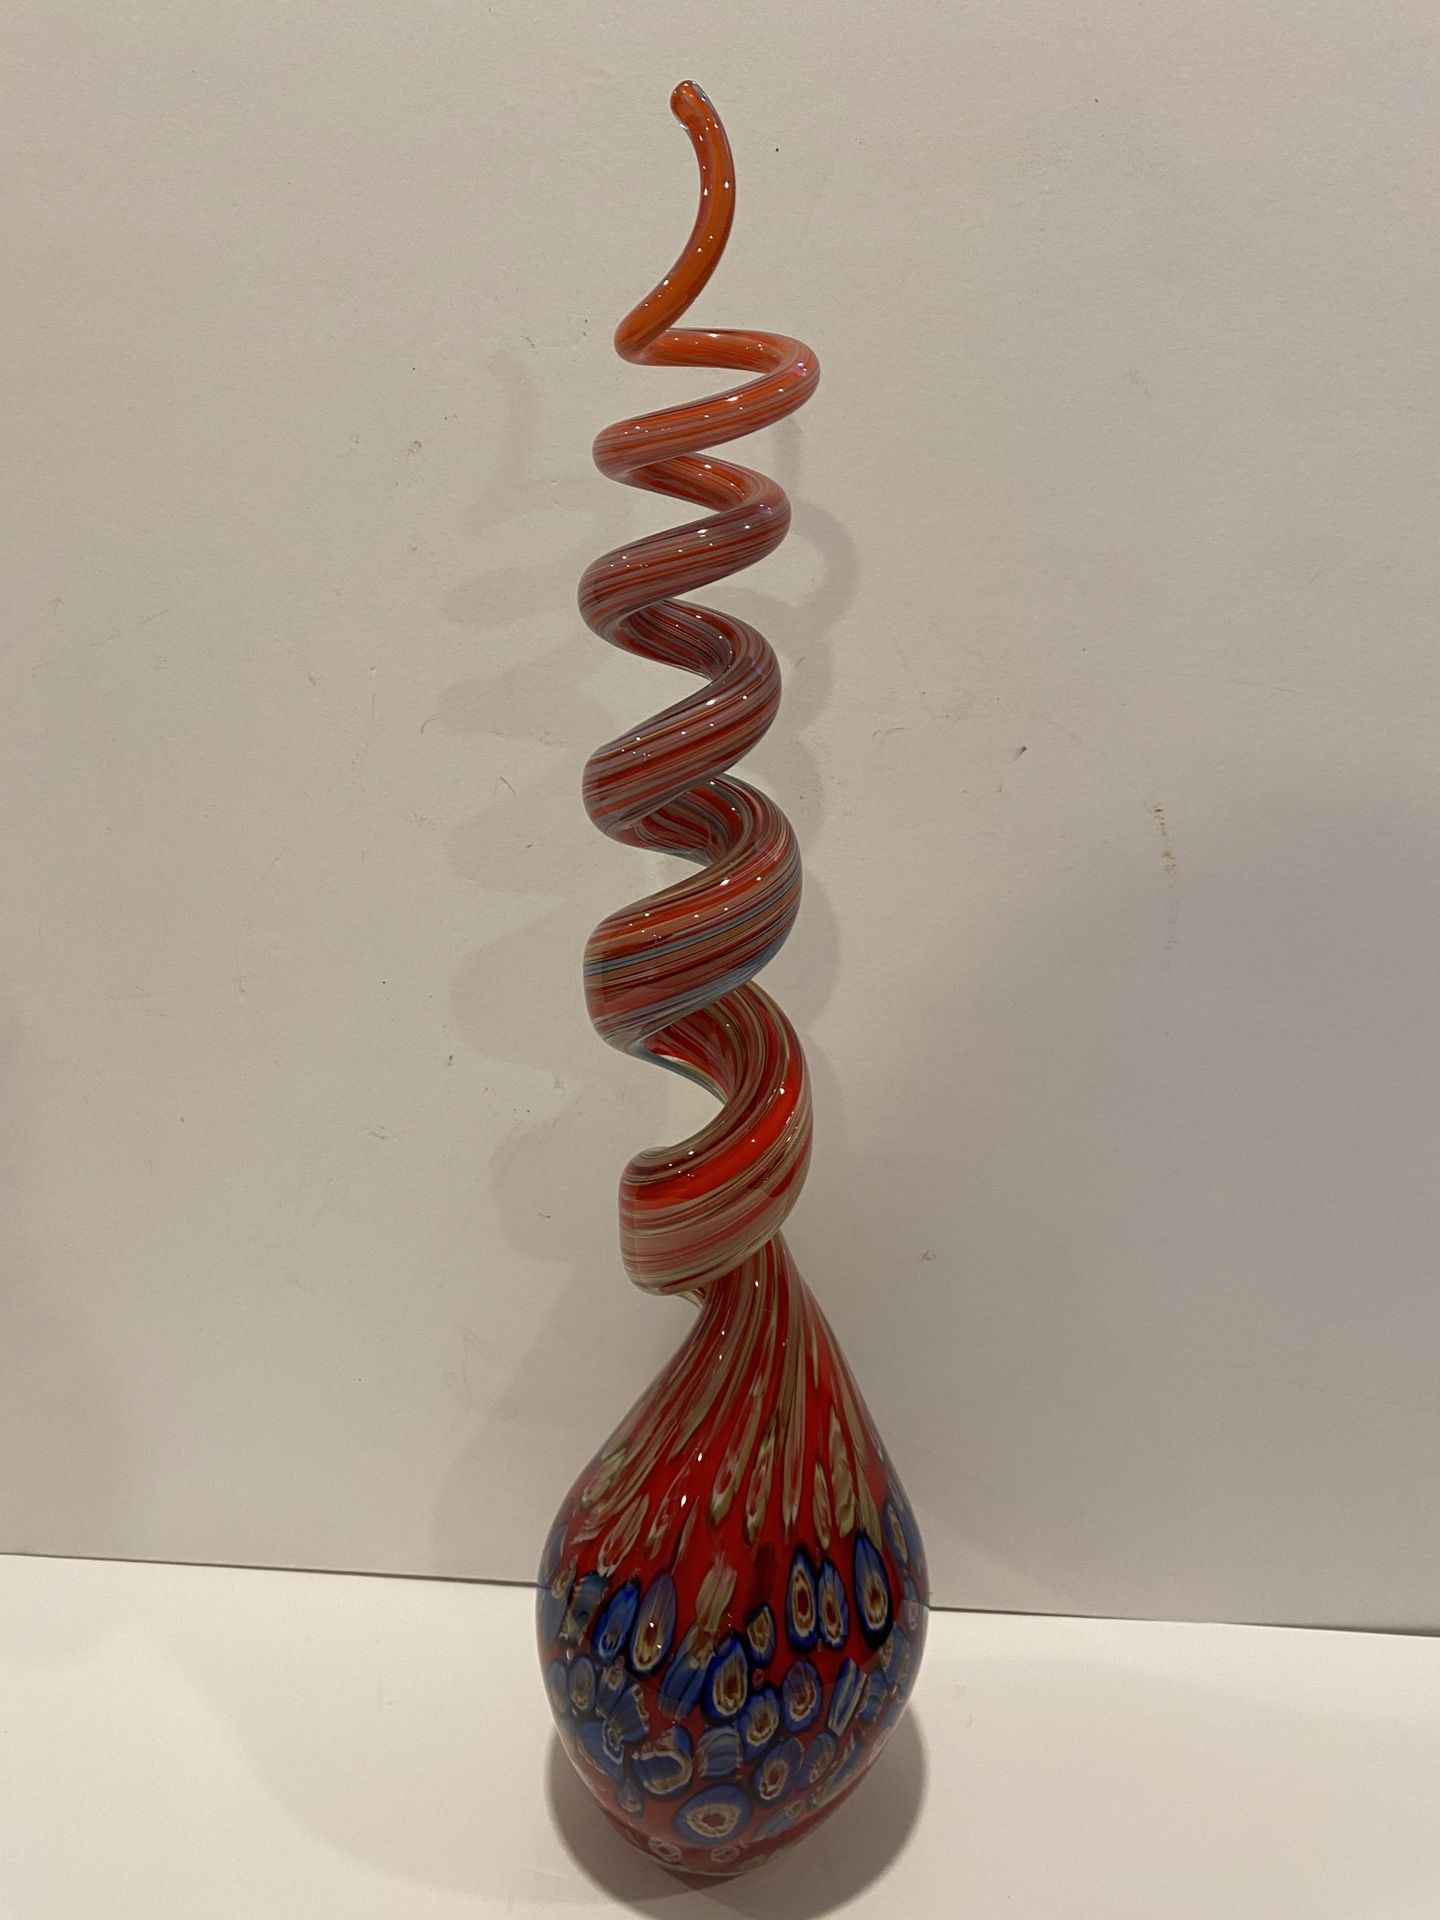 Hand Blown Millefiori? Art Spiral Glass Sculpture 17” tall by 4” wide  Tones of Red Blue and White